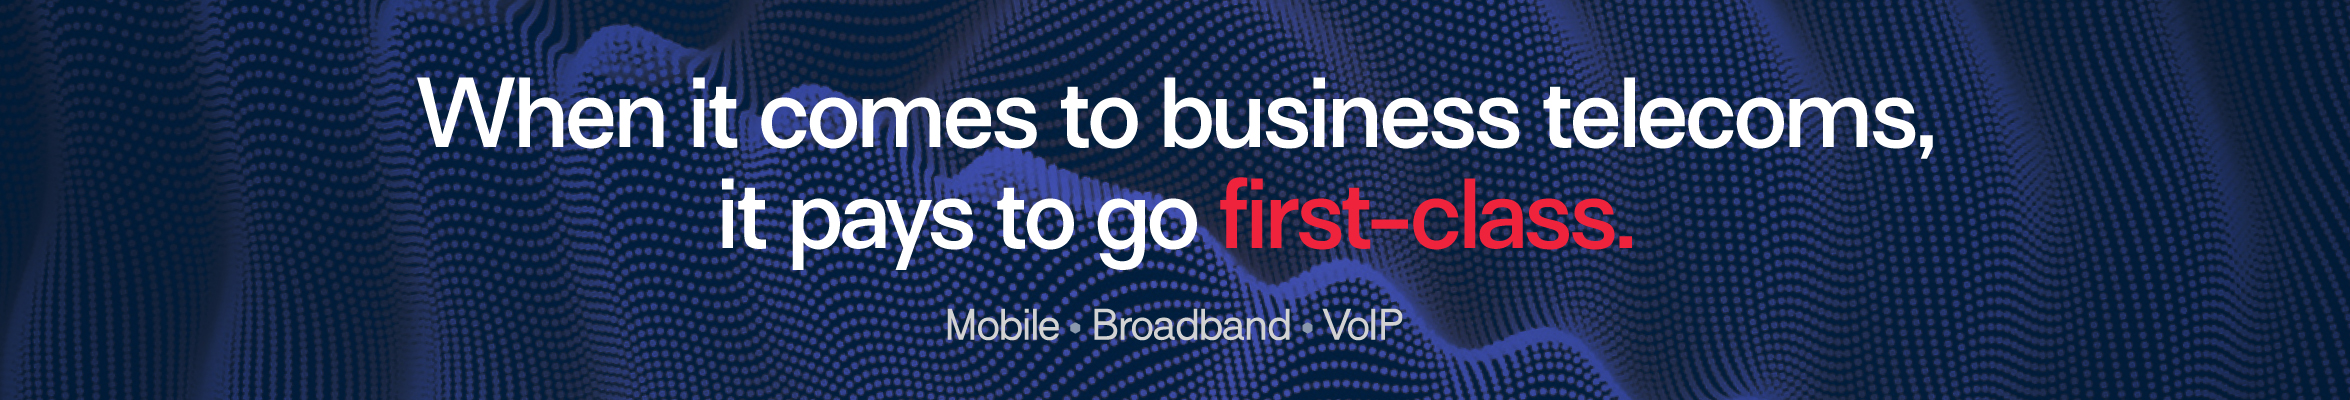 When it comes to business telecoms it pays to go first-class